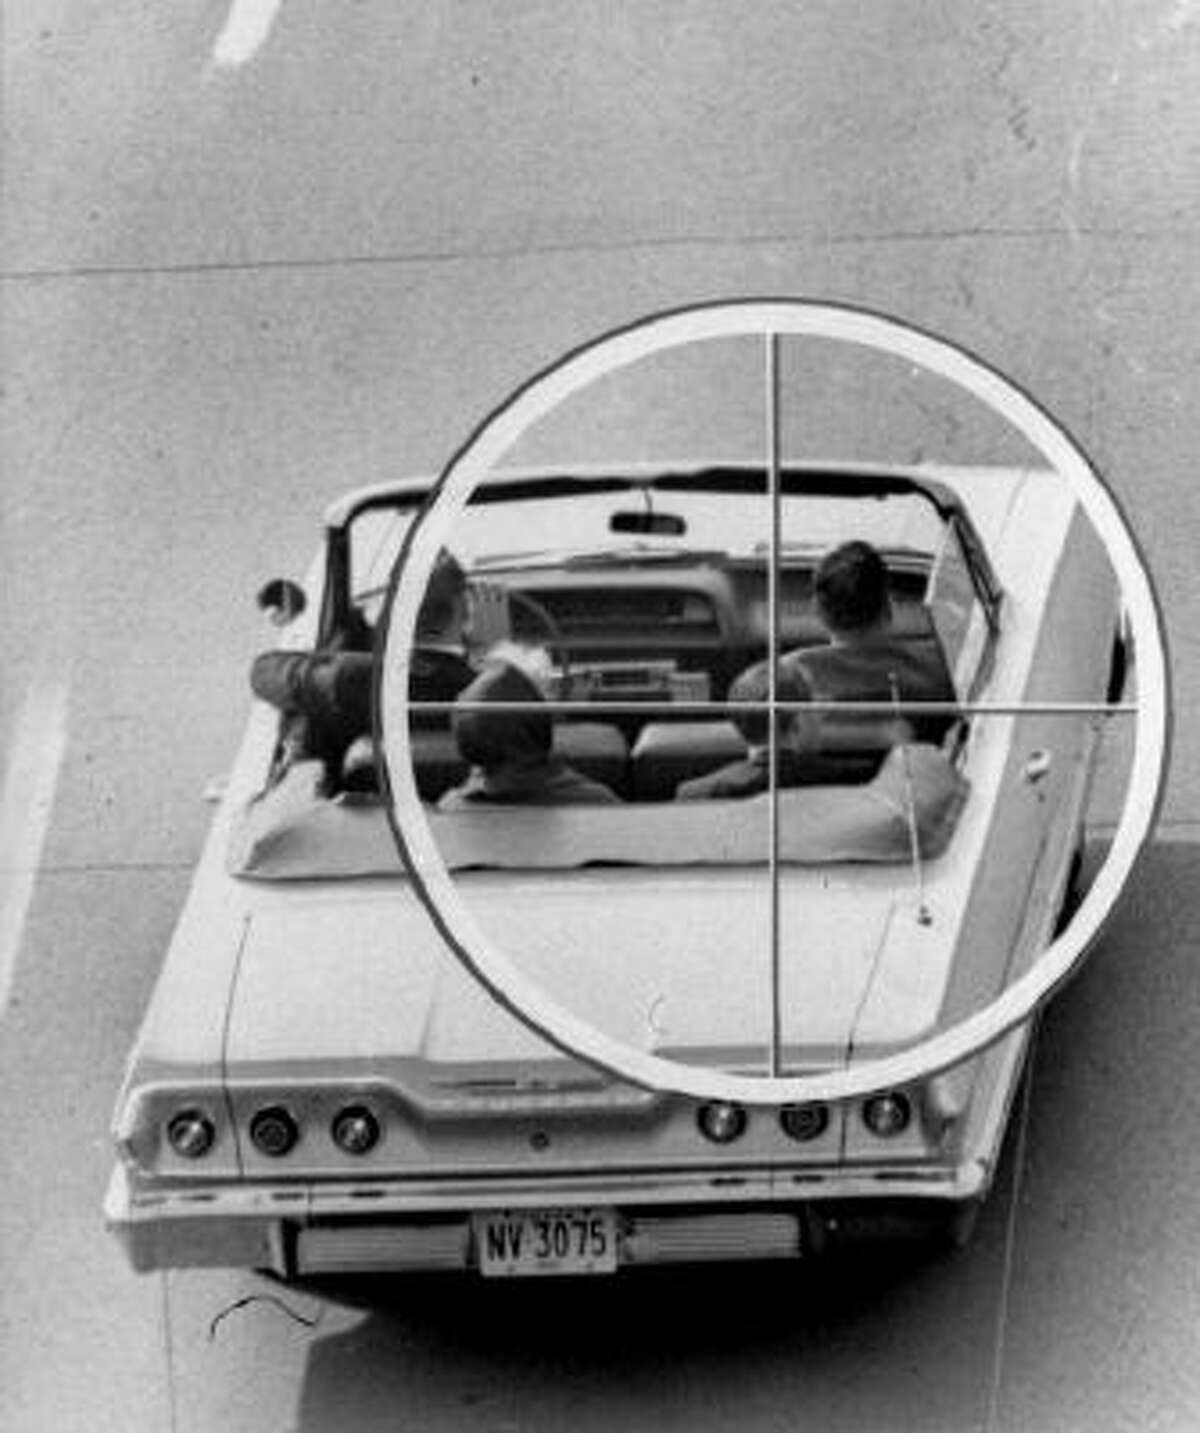 This Nov. 19, 1964 image provided by the Warren Commission shows a reconstruction of the approximate view the assassin of President John Kennedy might have had through the telescopic sight of the rifle fired from the Texas School Book Depository Building on Nov. 22, 1963.